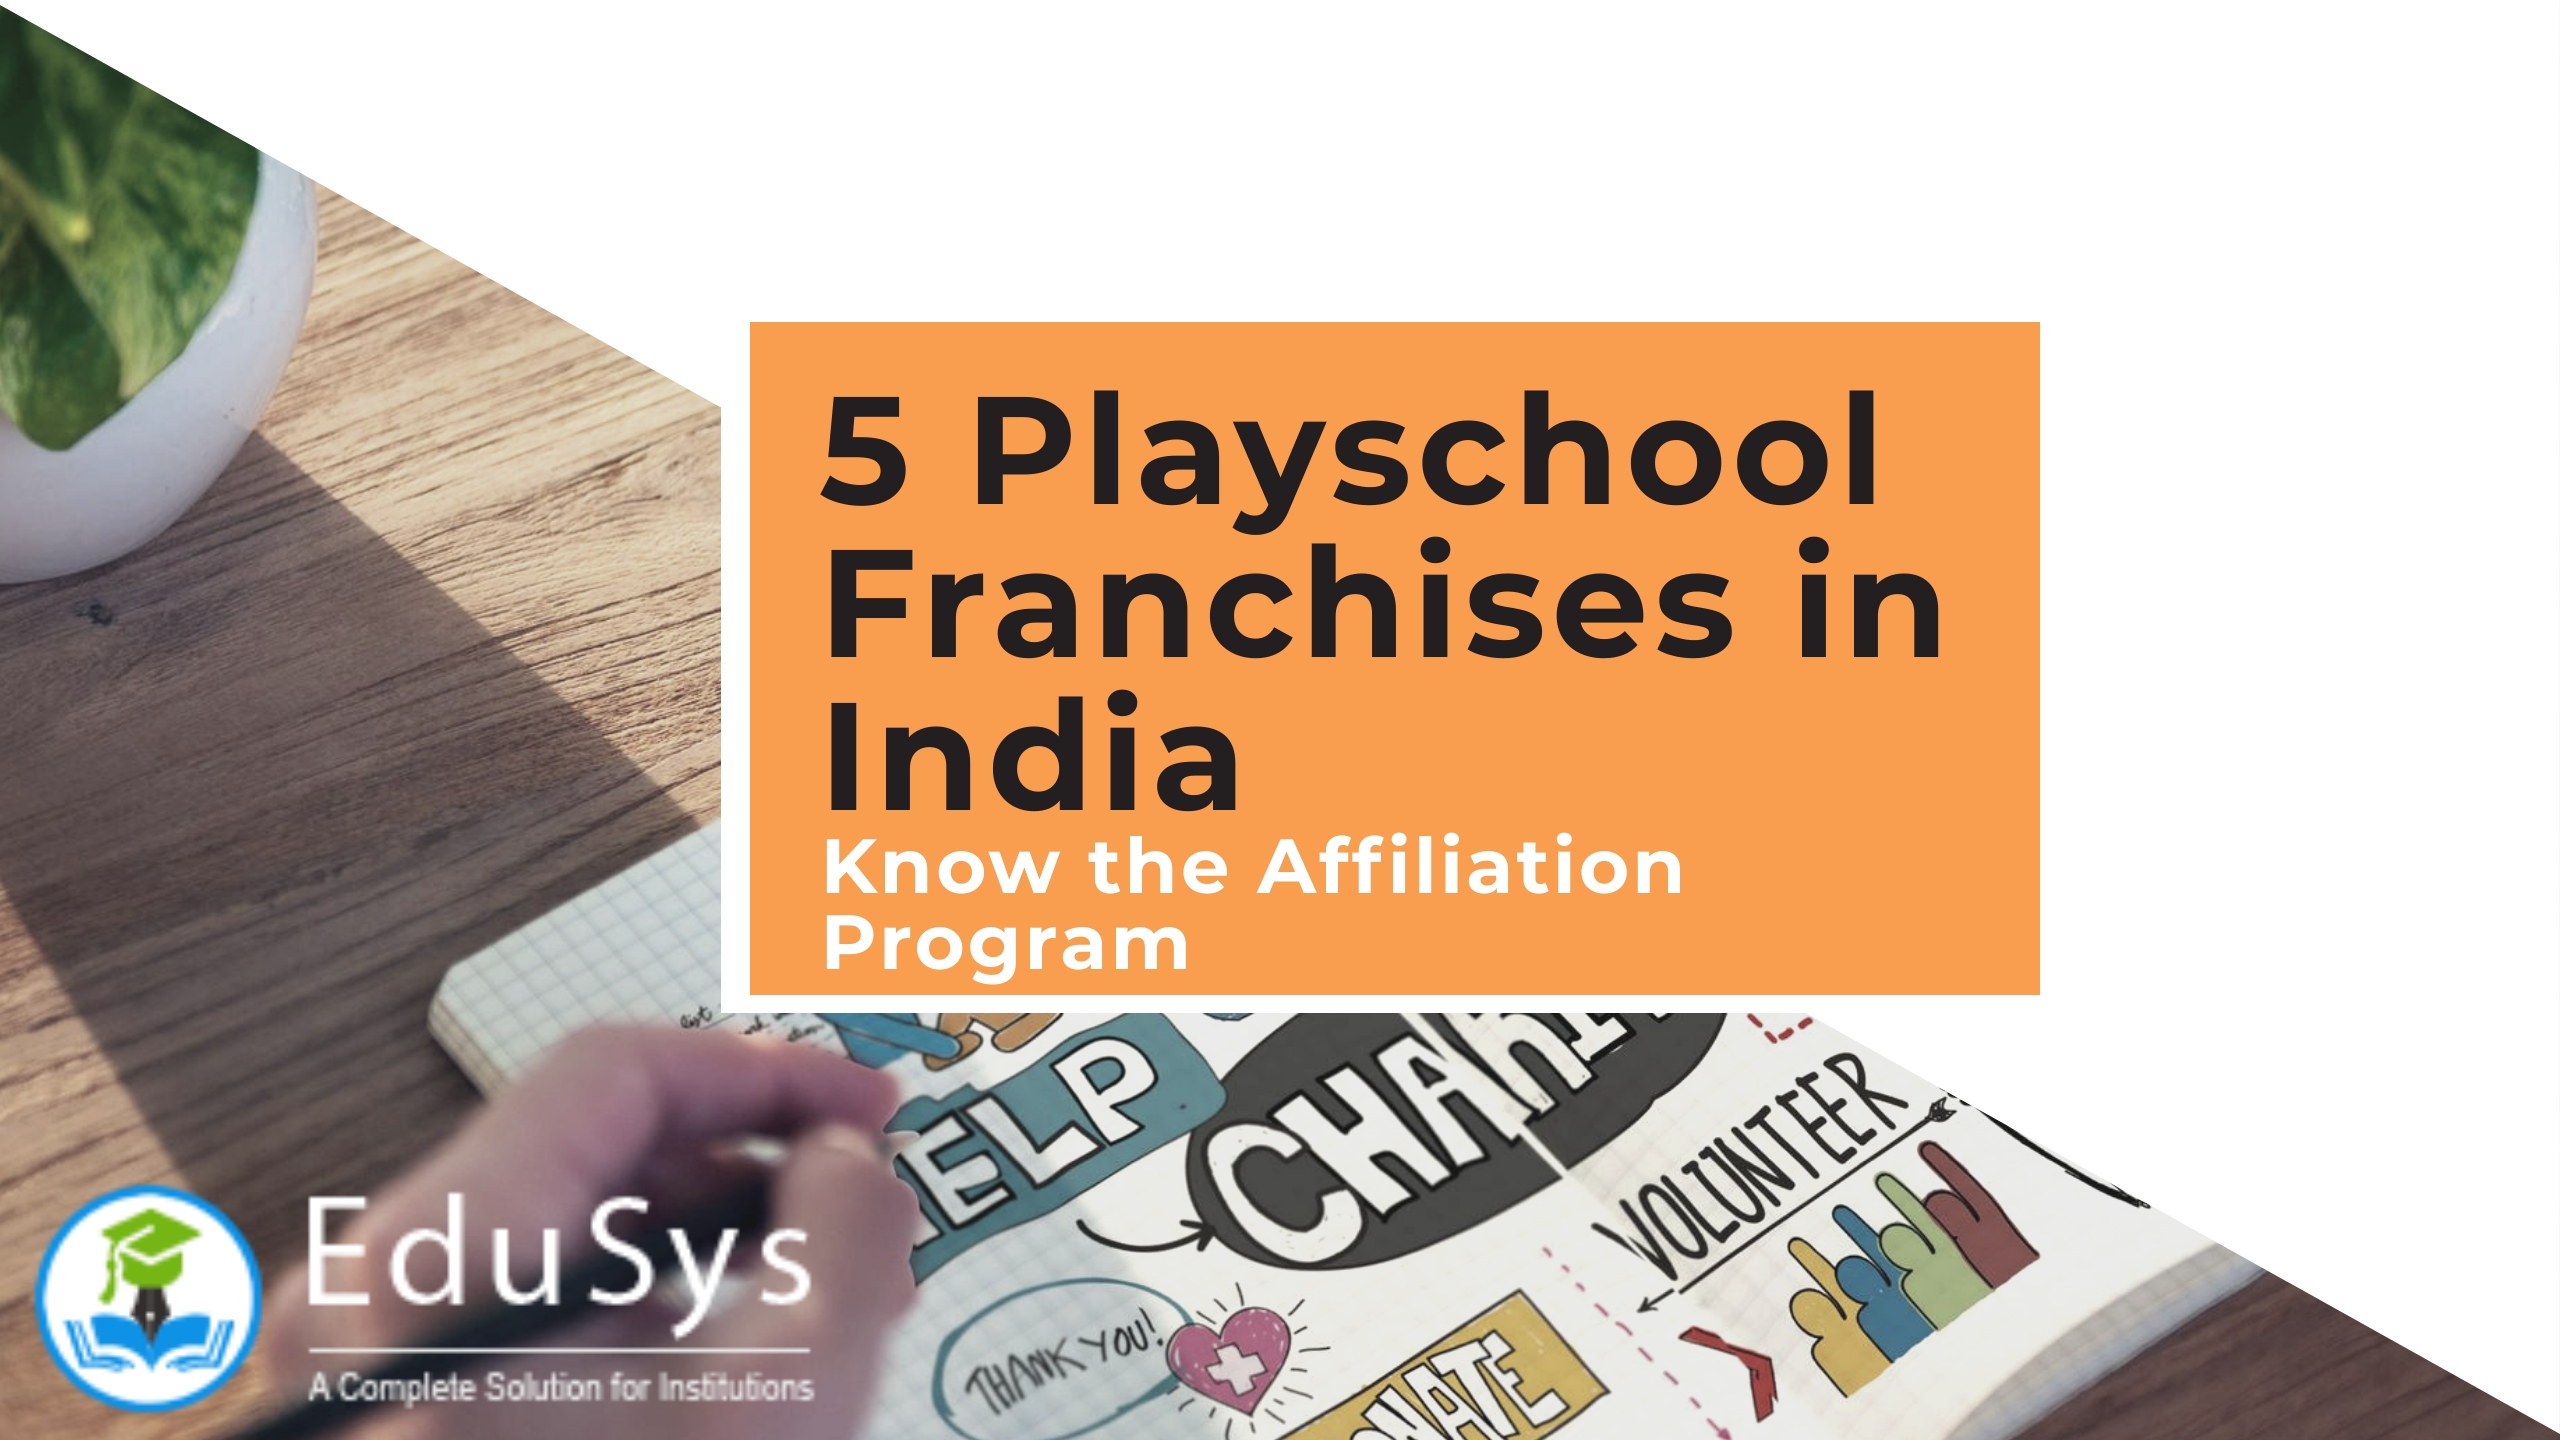 5 Playschool Franchise in India (2022) - Know Affiliation Program